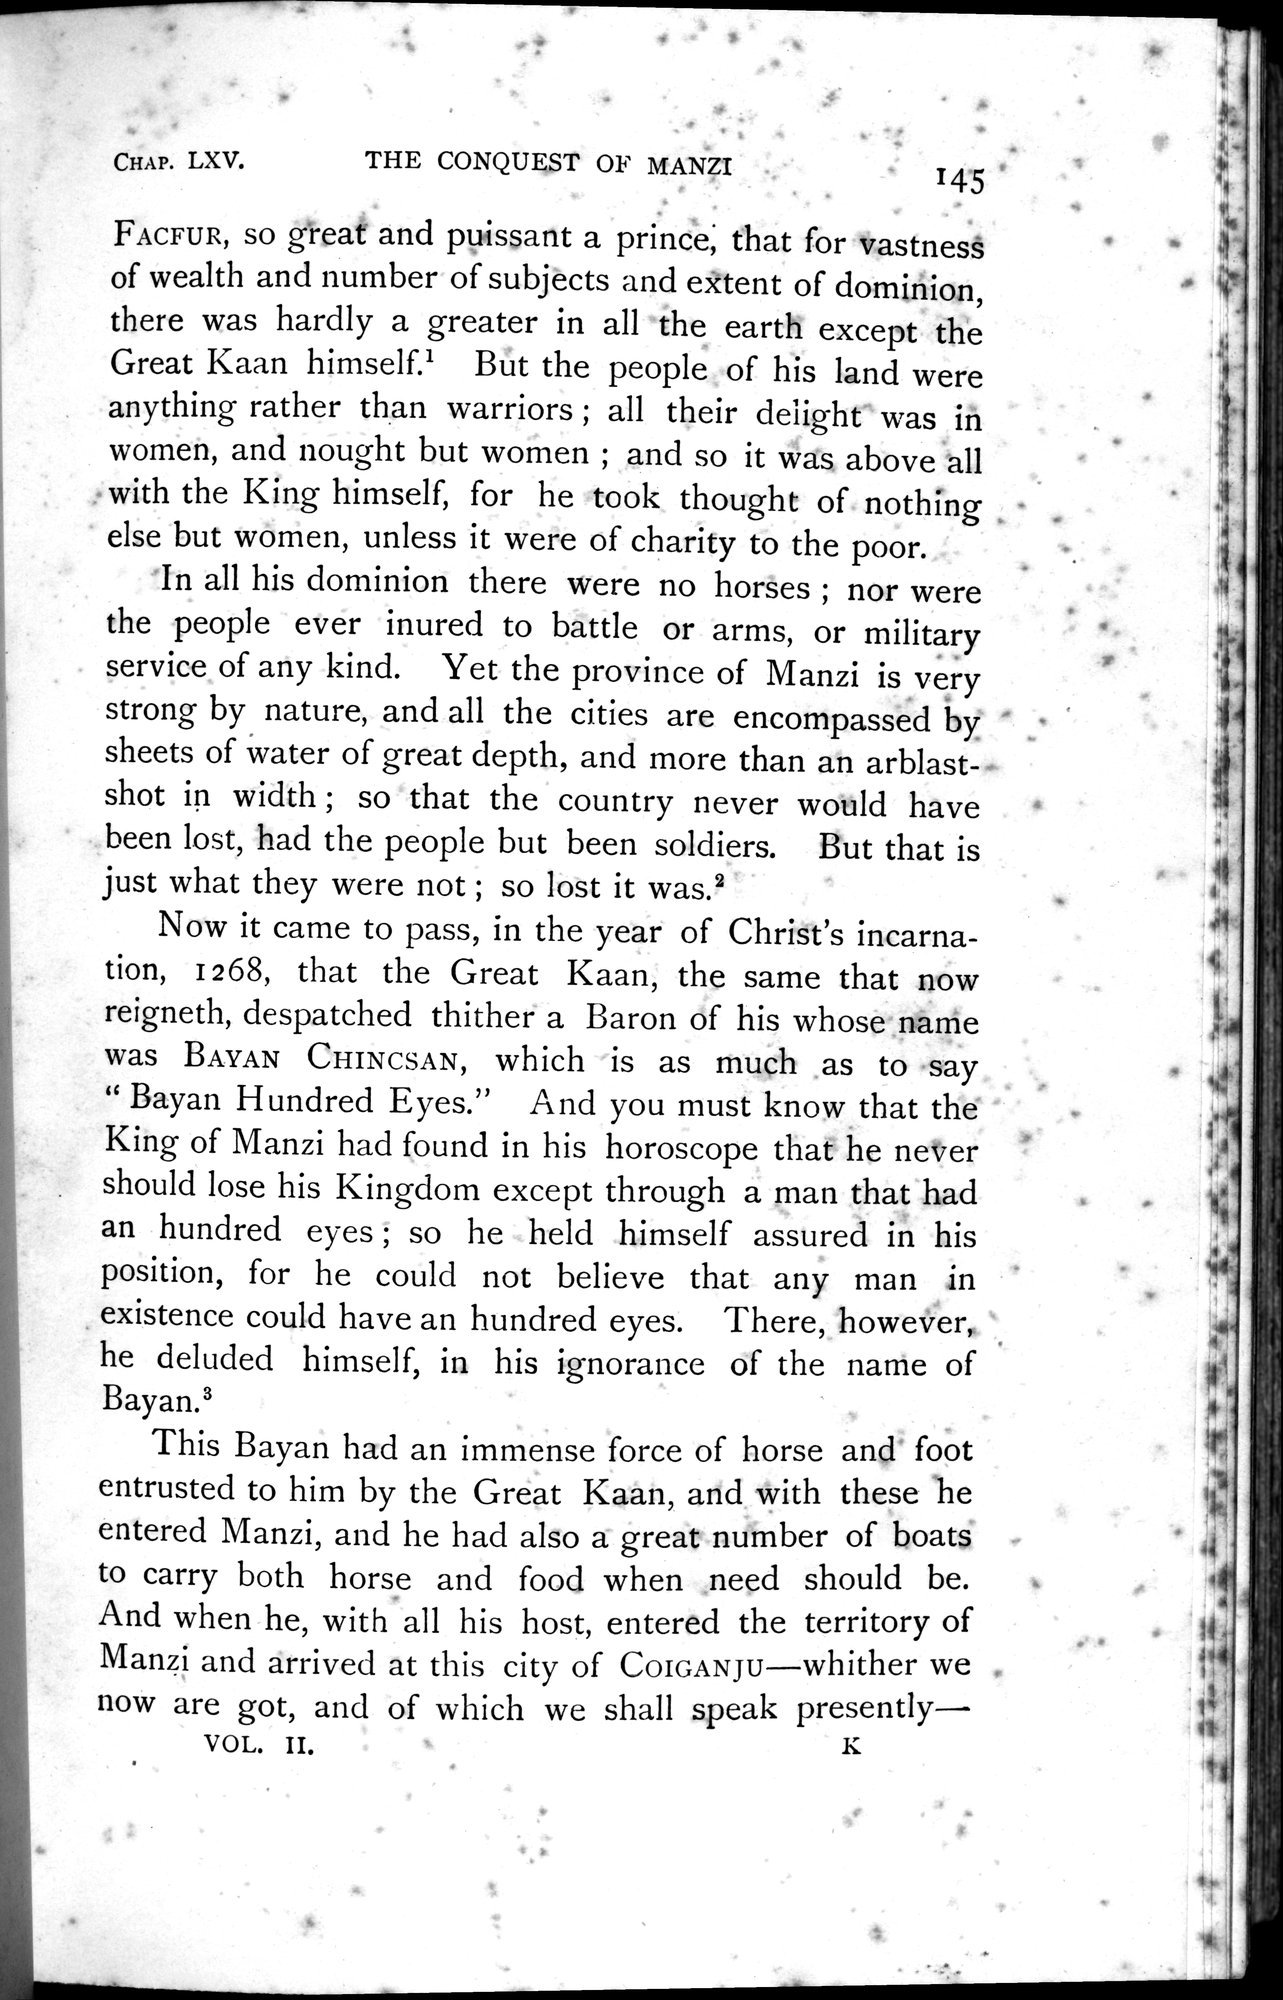 The Book of Ser Marco Polo : vol.2 / Page 189 (Grayscale High Resolution Image)